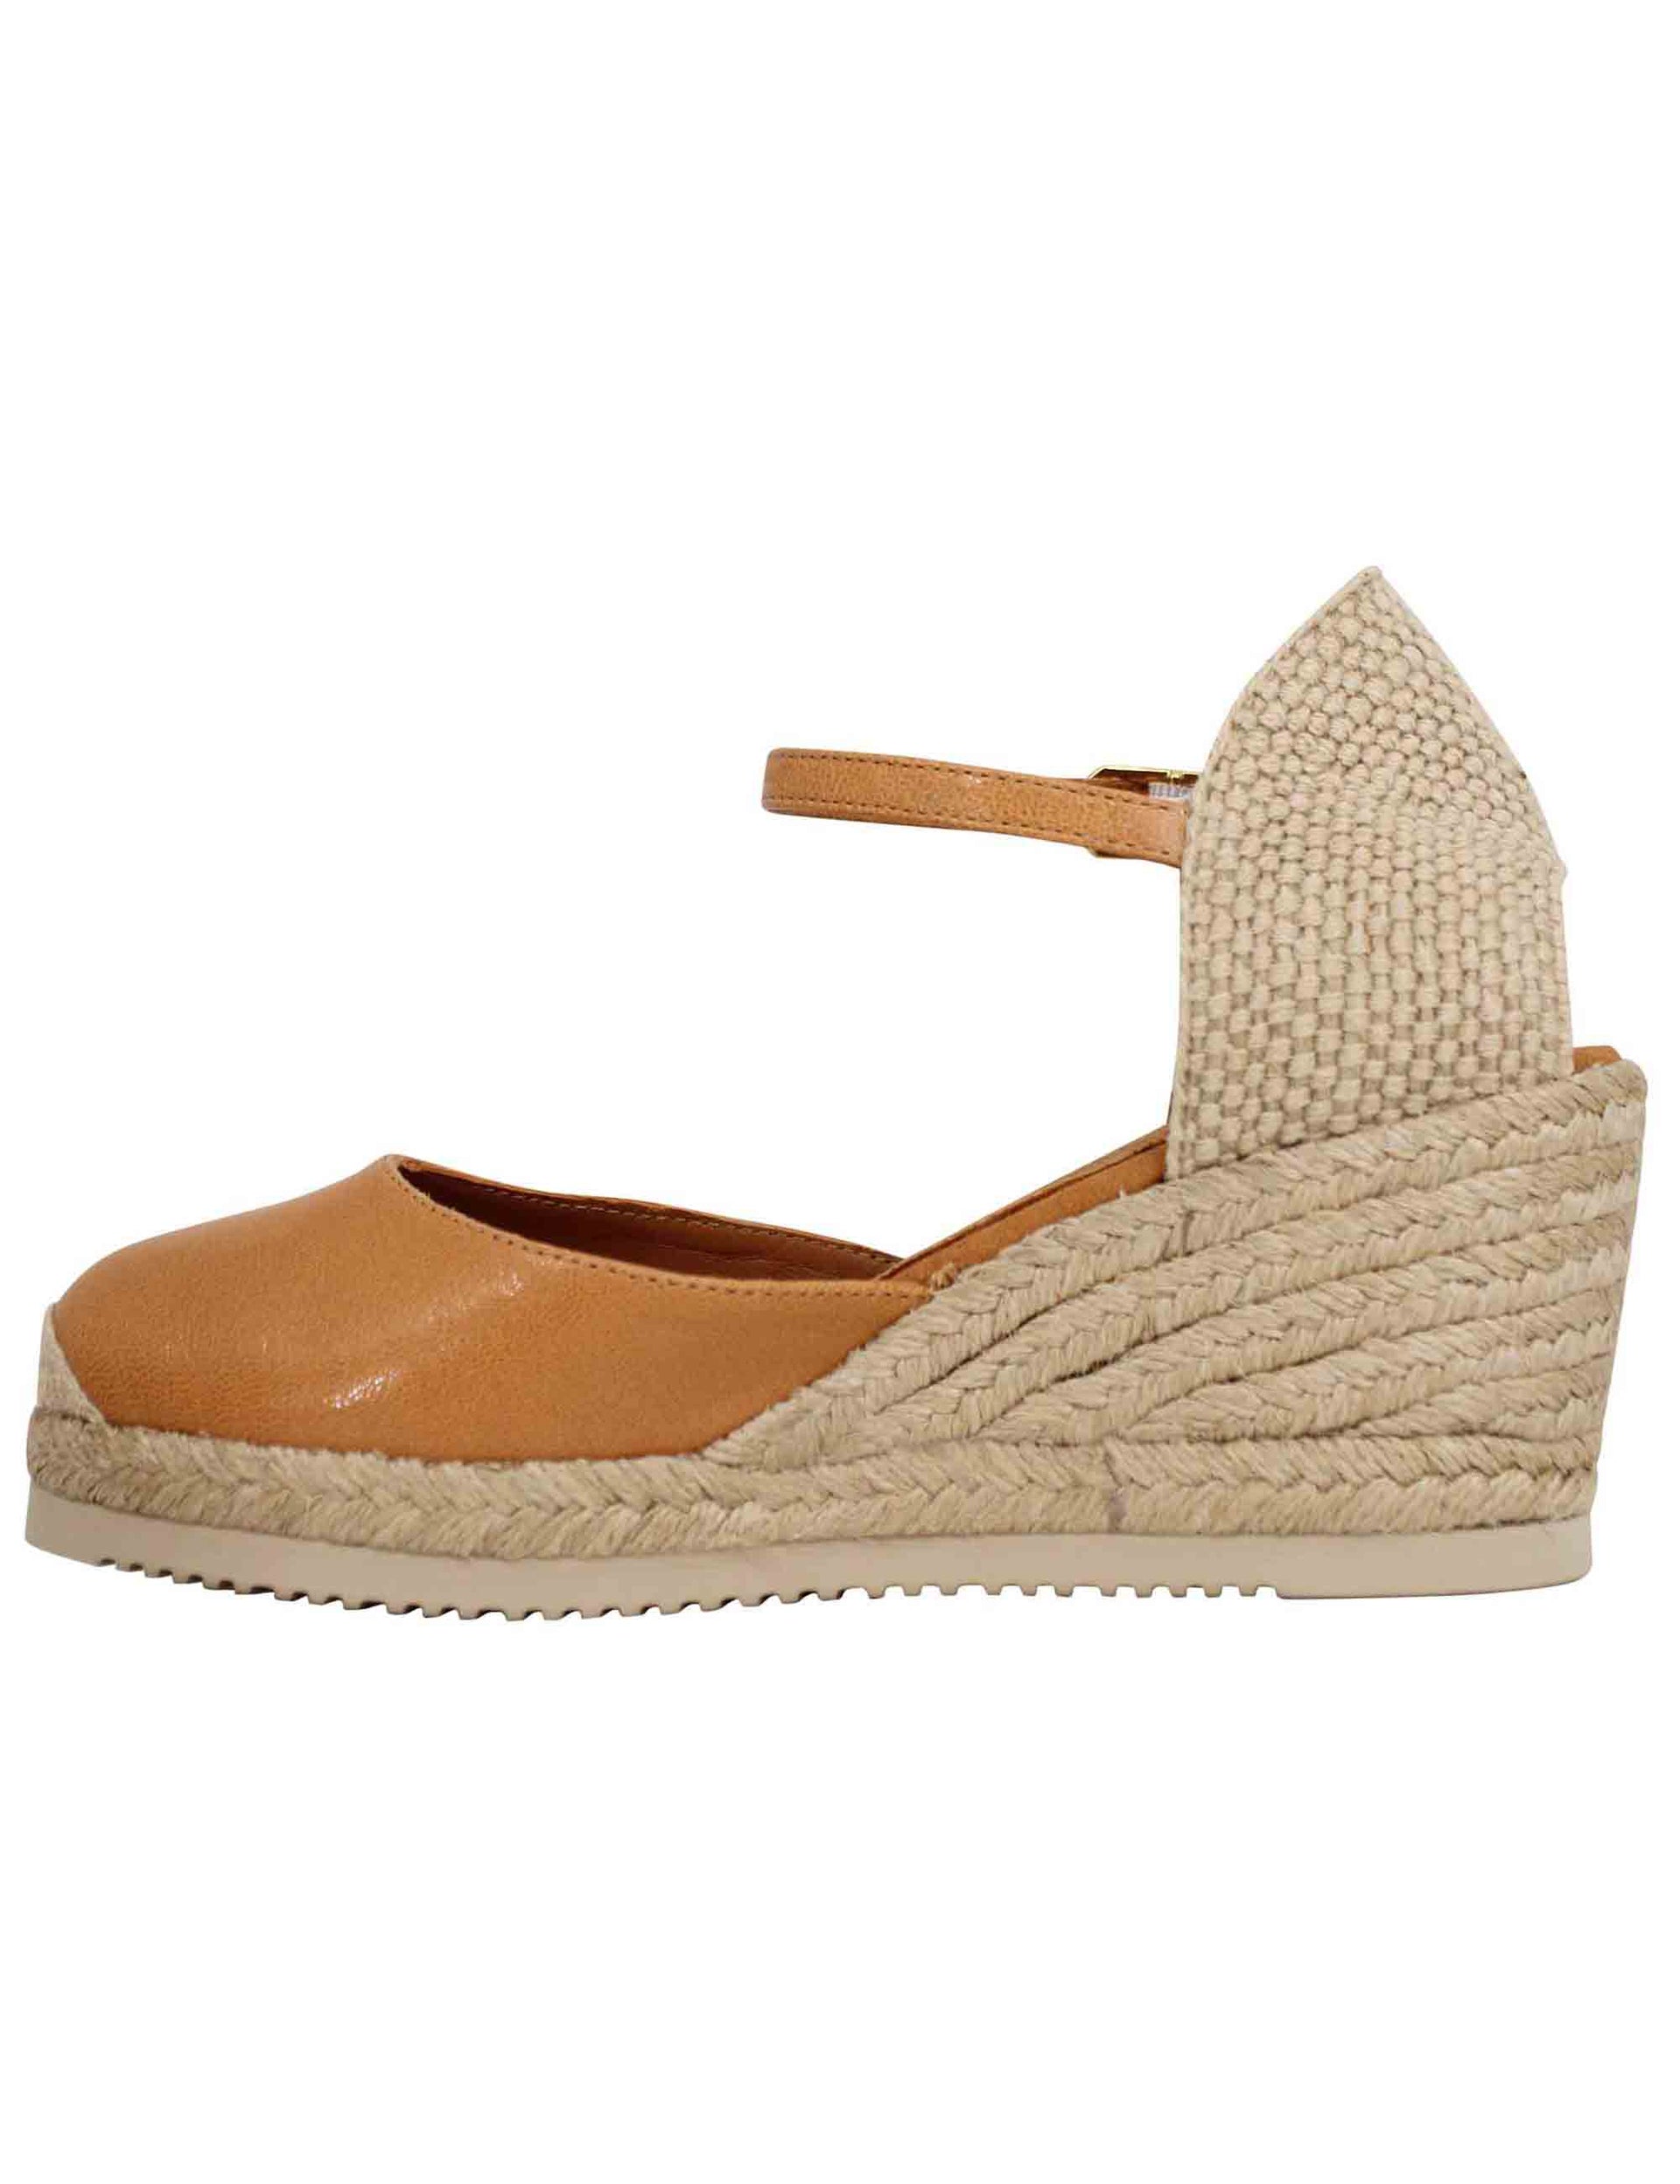 Women's espadrille sandals in tan leather with ankle strap